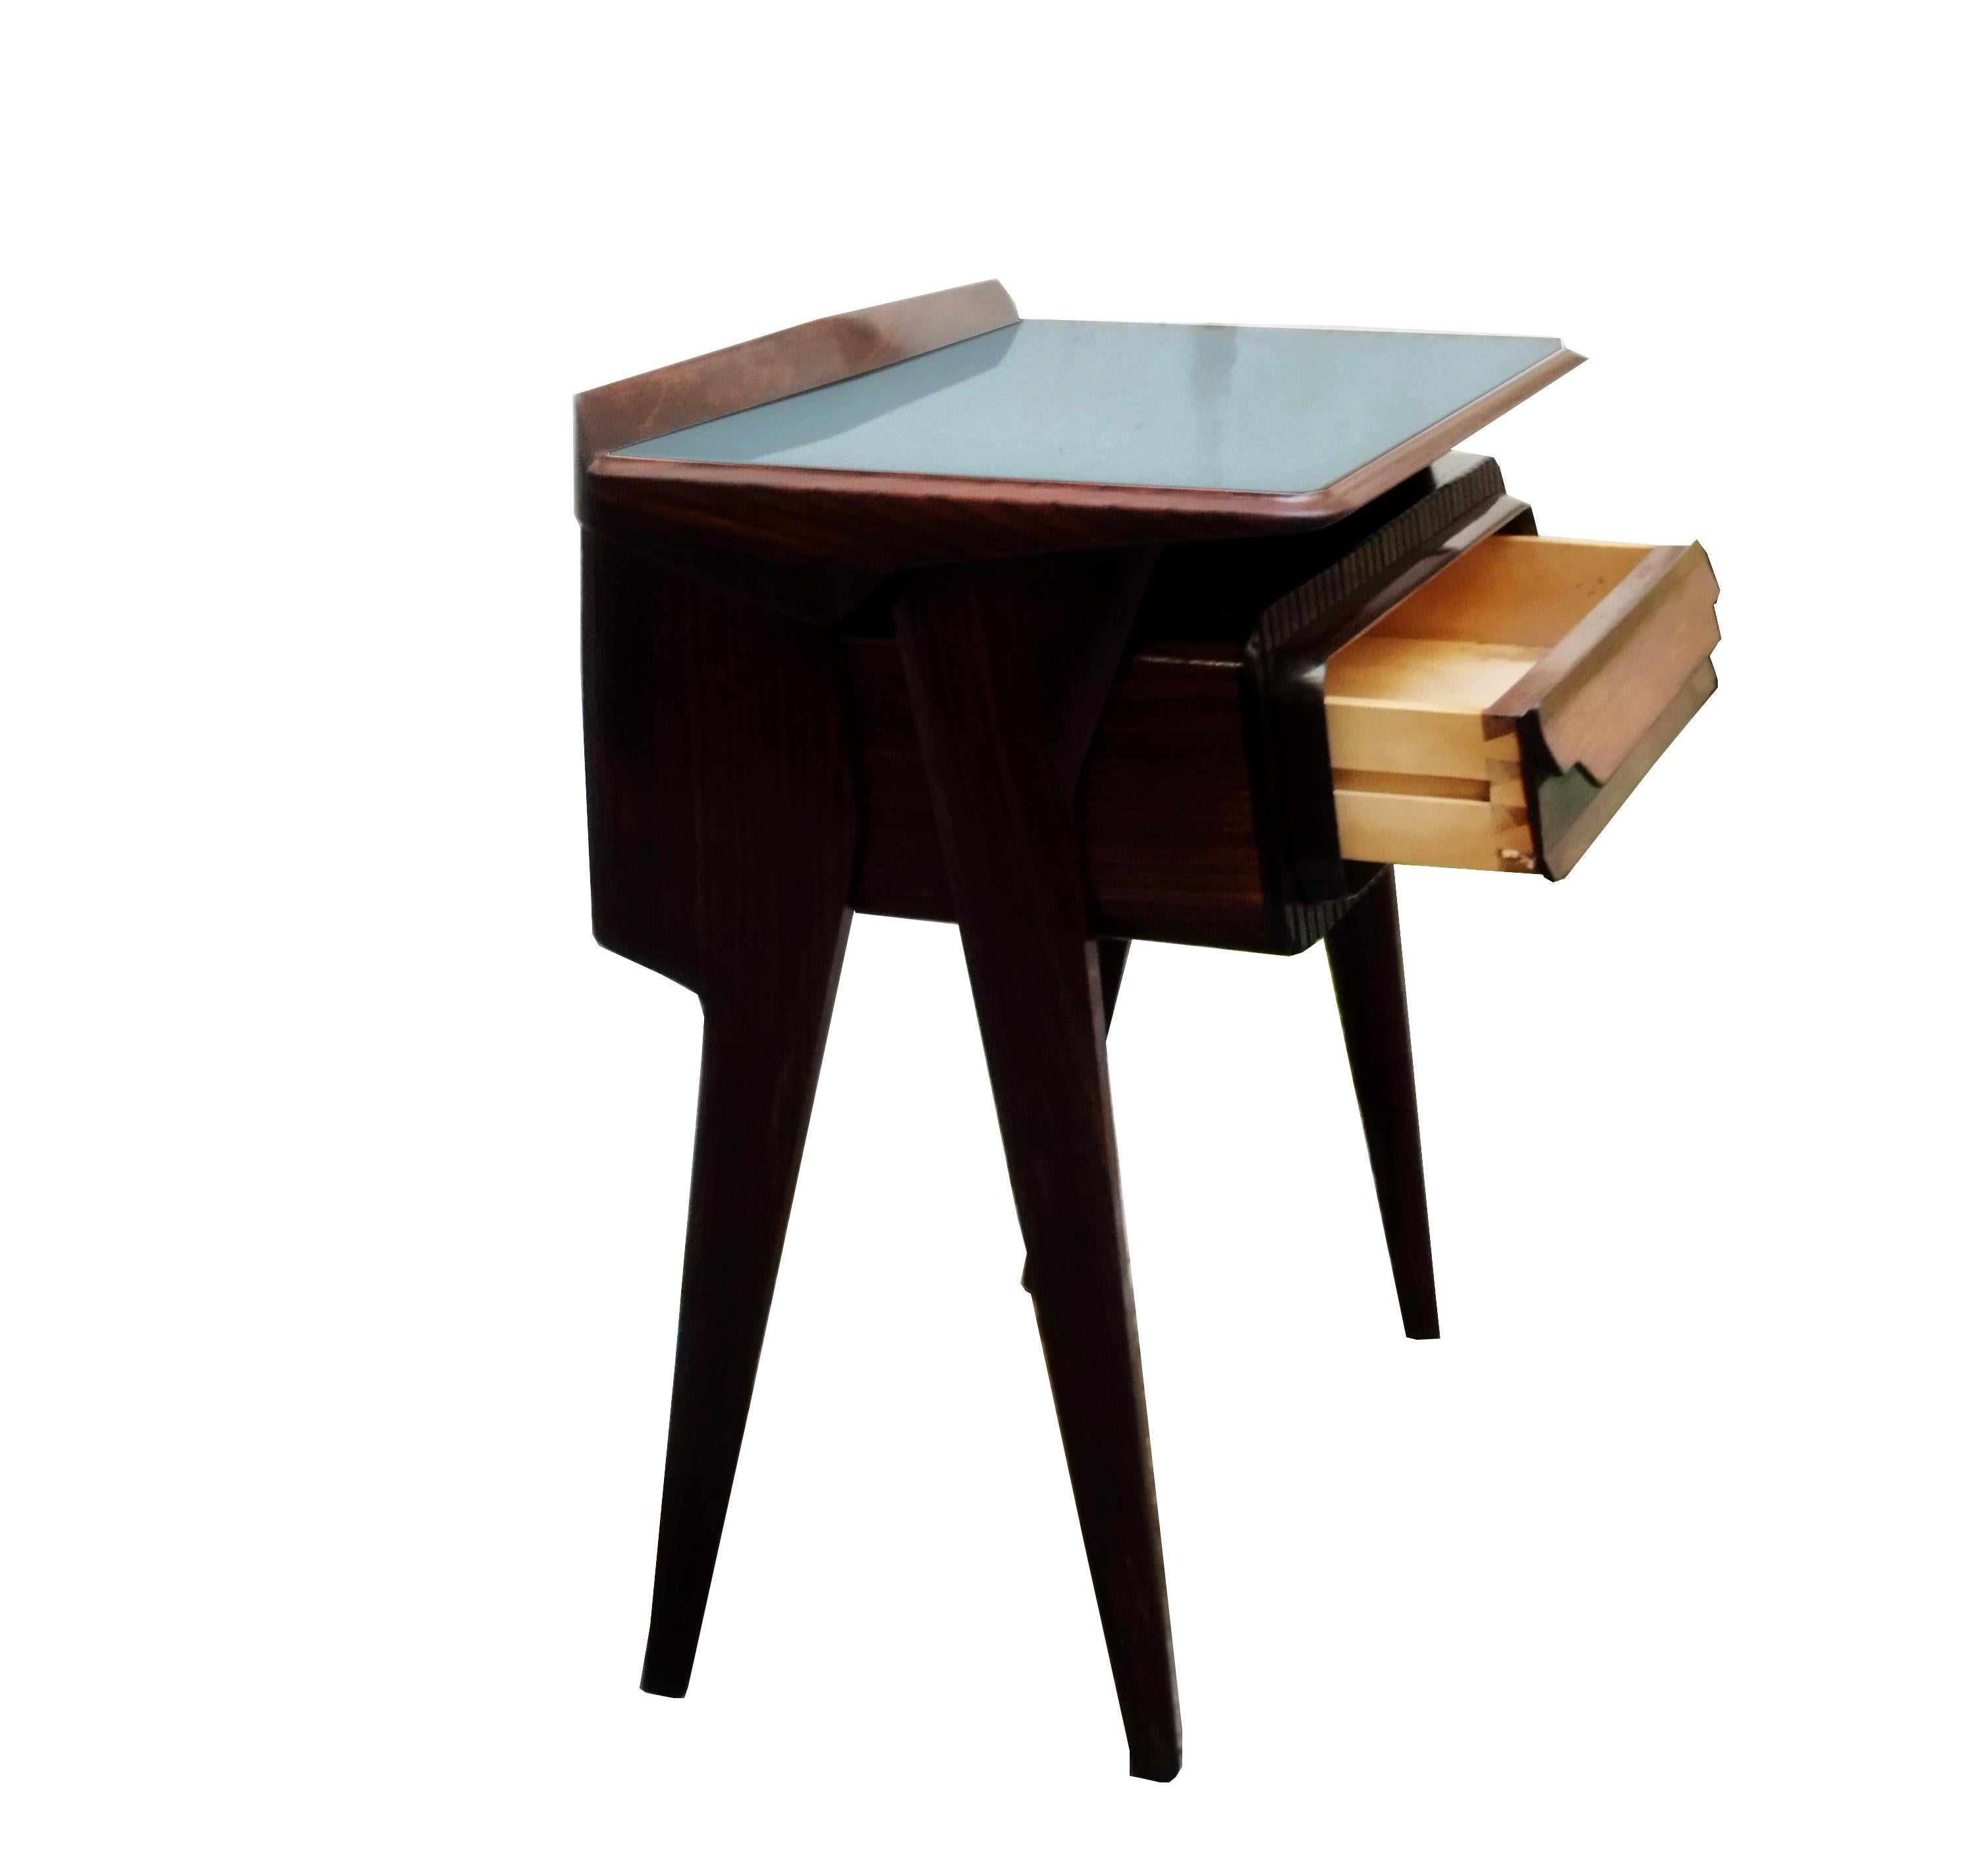 Wooden bedside table designed by Vittorio Dassi in the 1950s.
 Its aesthetic uniqueness lies in the original sculptural design of the shape of the drawer and the side supports, as well as the green glass top surmounted by a long, thick transparent